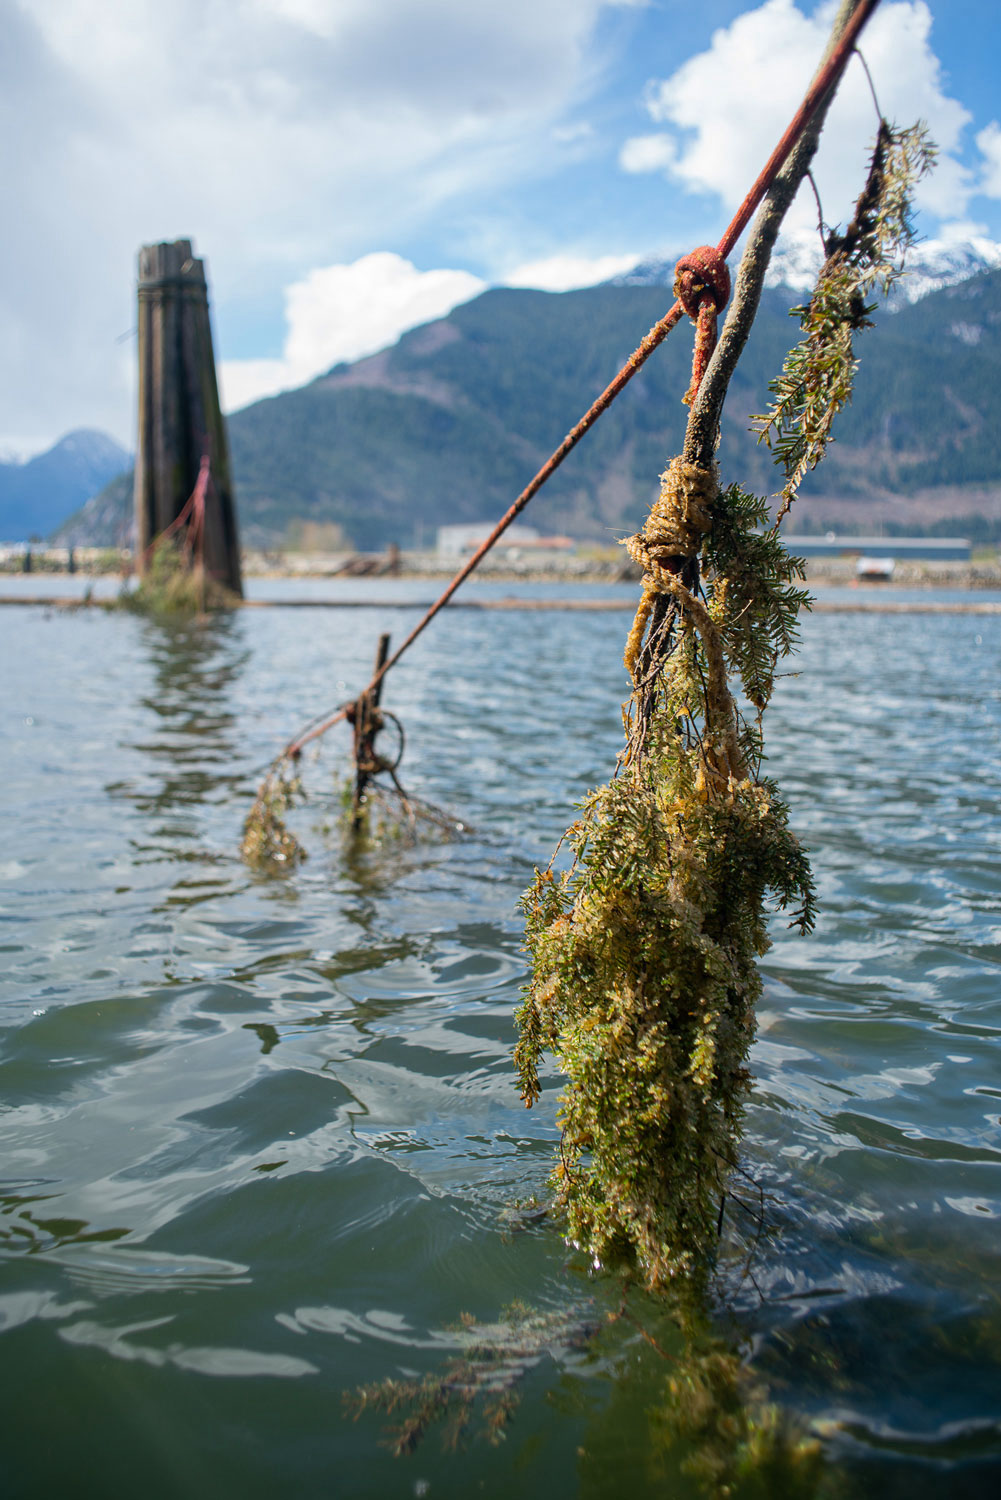 Hemlock boughs dangle in the ocean with mountains in the background